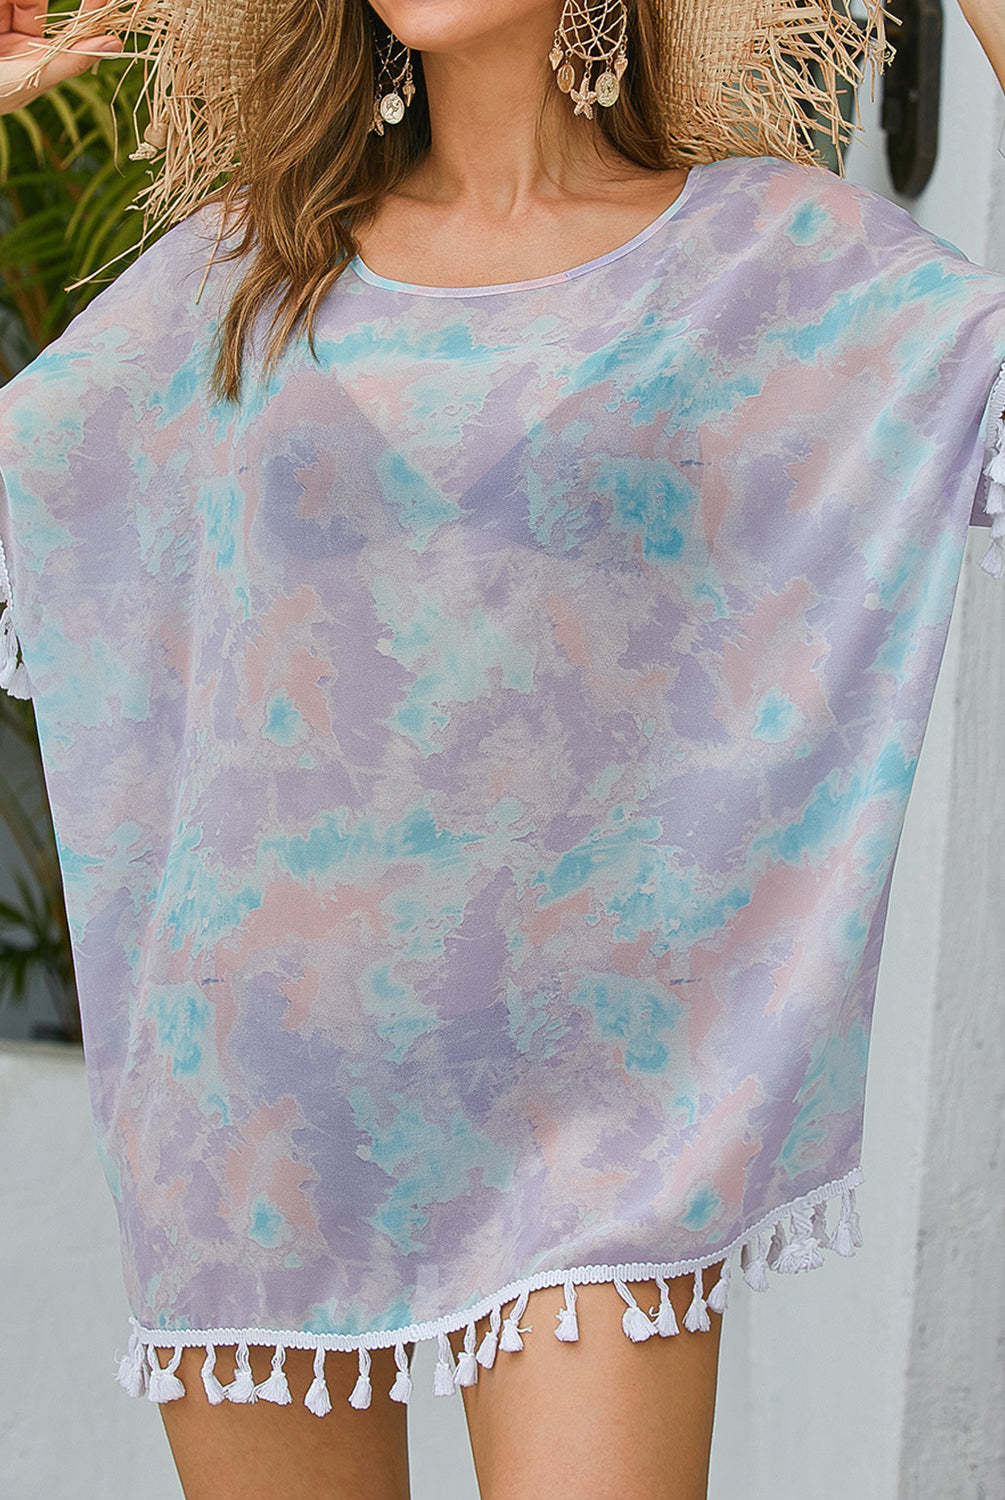 Woman in a colorful watercolor print cover up with tassel details, ideal for a stylish beach look.